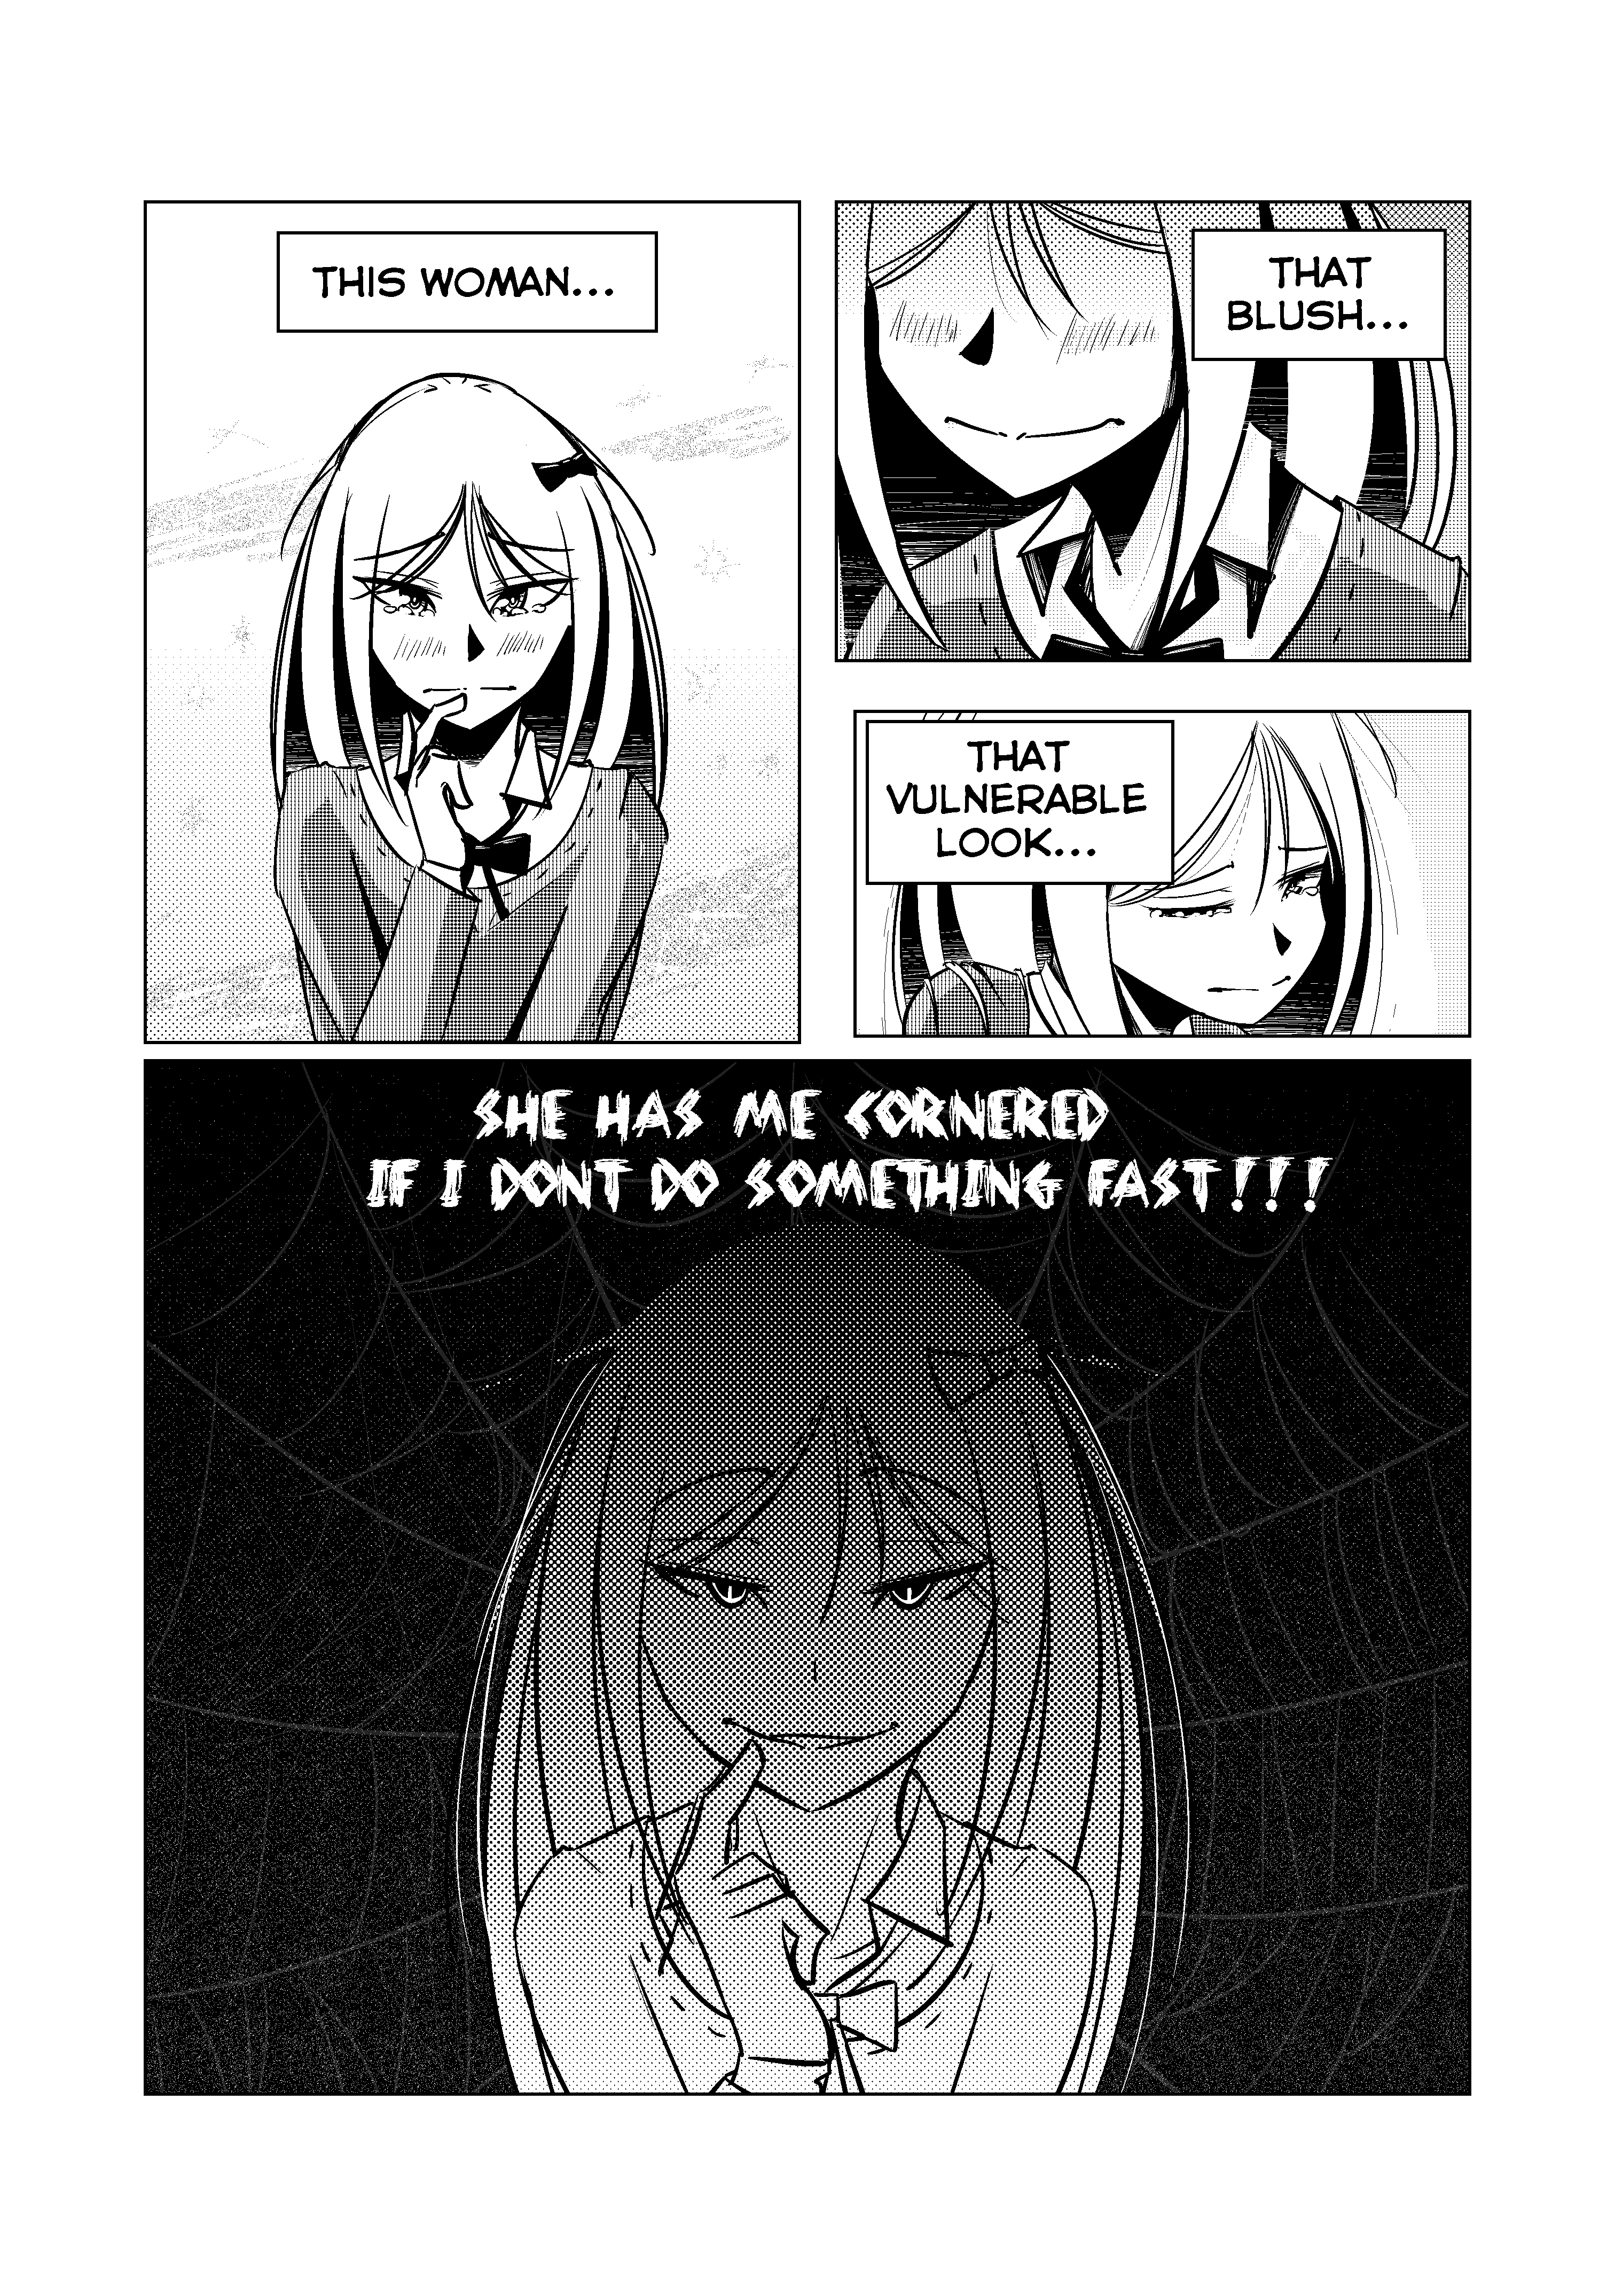 Opposites In Disguise - 0 page 8